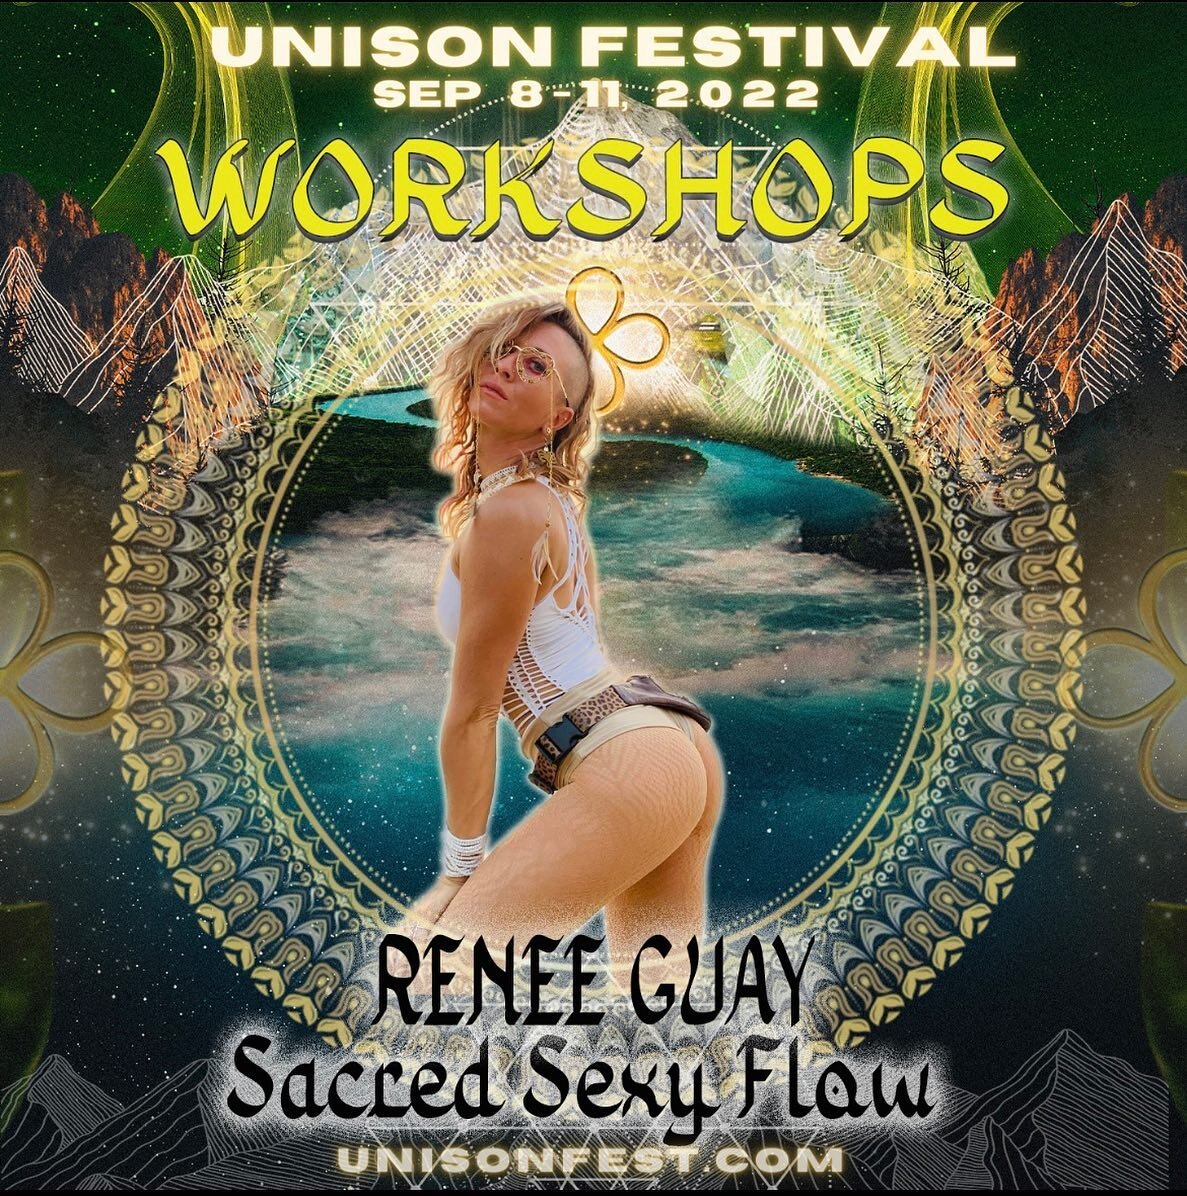 I&rsquo;m bringing the seXy &amp; the spiritual to my favorite festival! 😍
@_unison_fest_ 

Join me for a transformational movement journey as we call in our 
A$$ended Masters to awaken our creative energy &amp; manifest our dreams! ❤️&zwj;🔥 

With